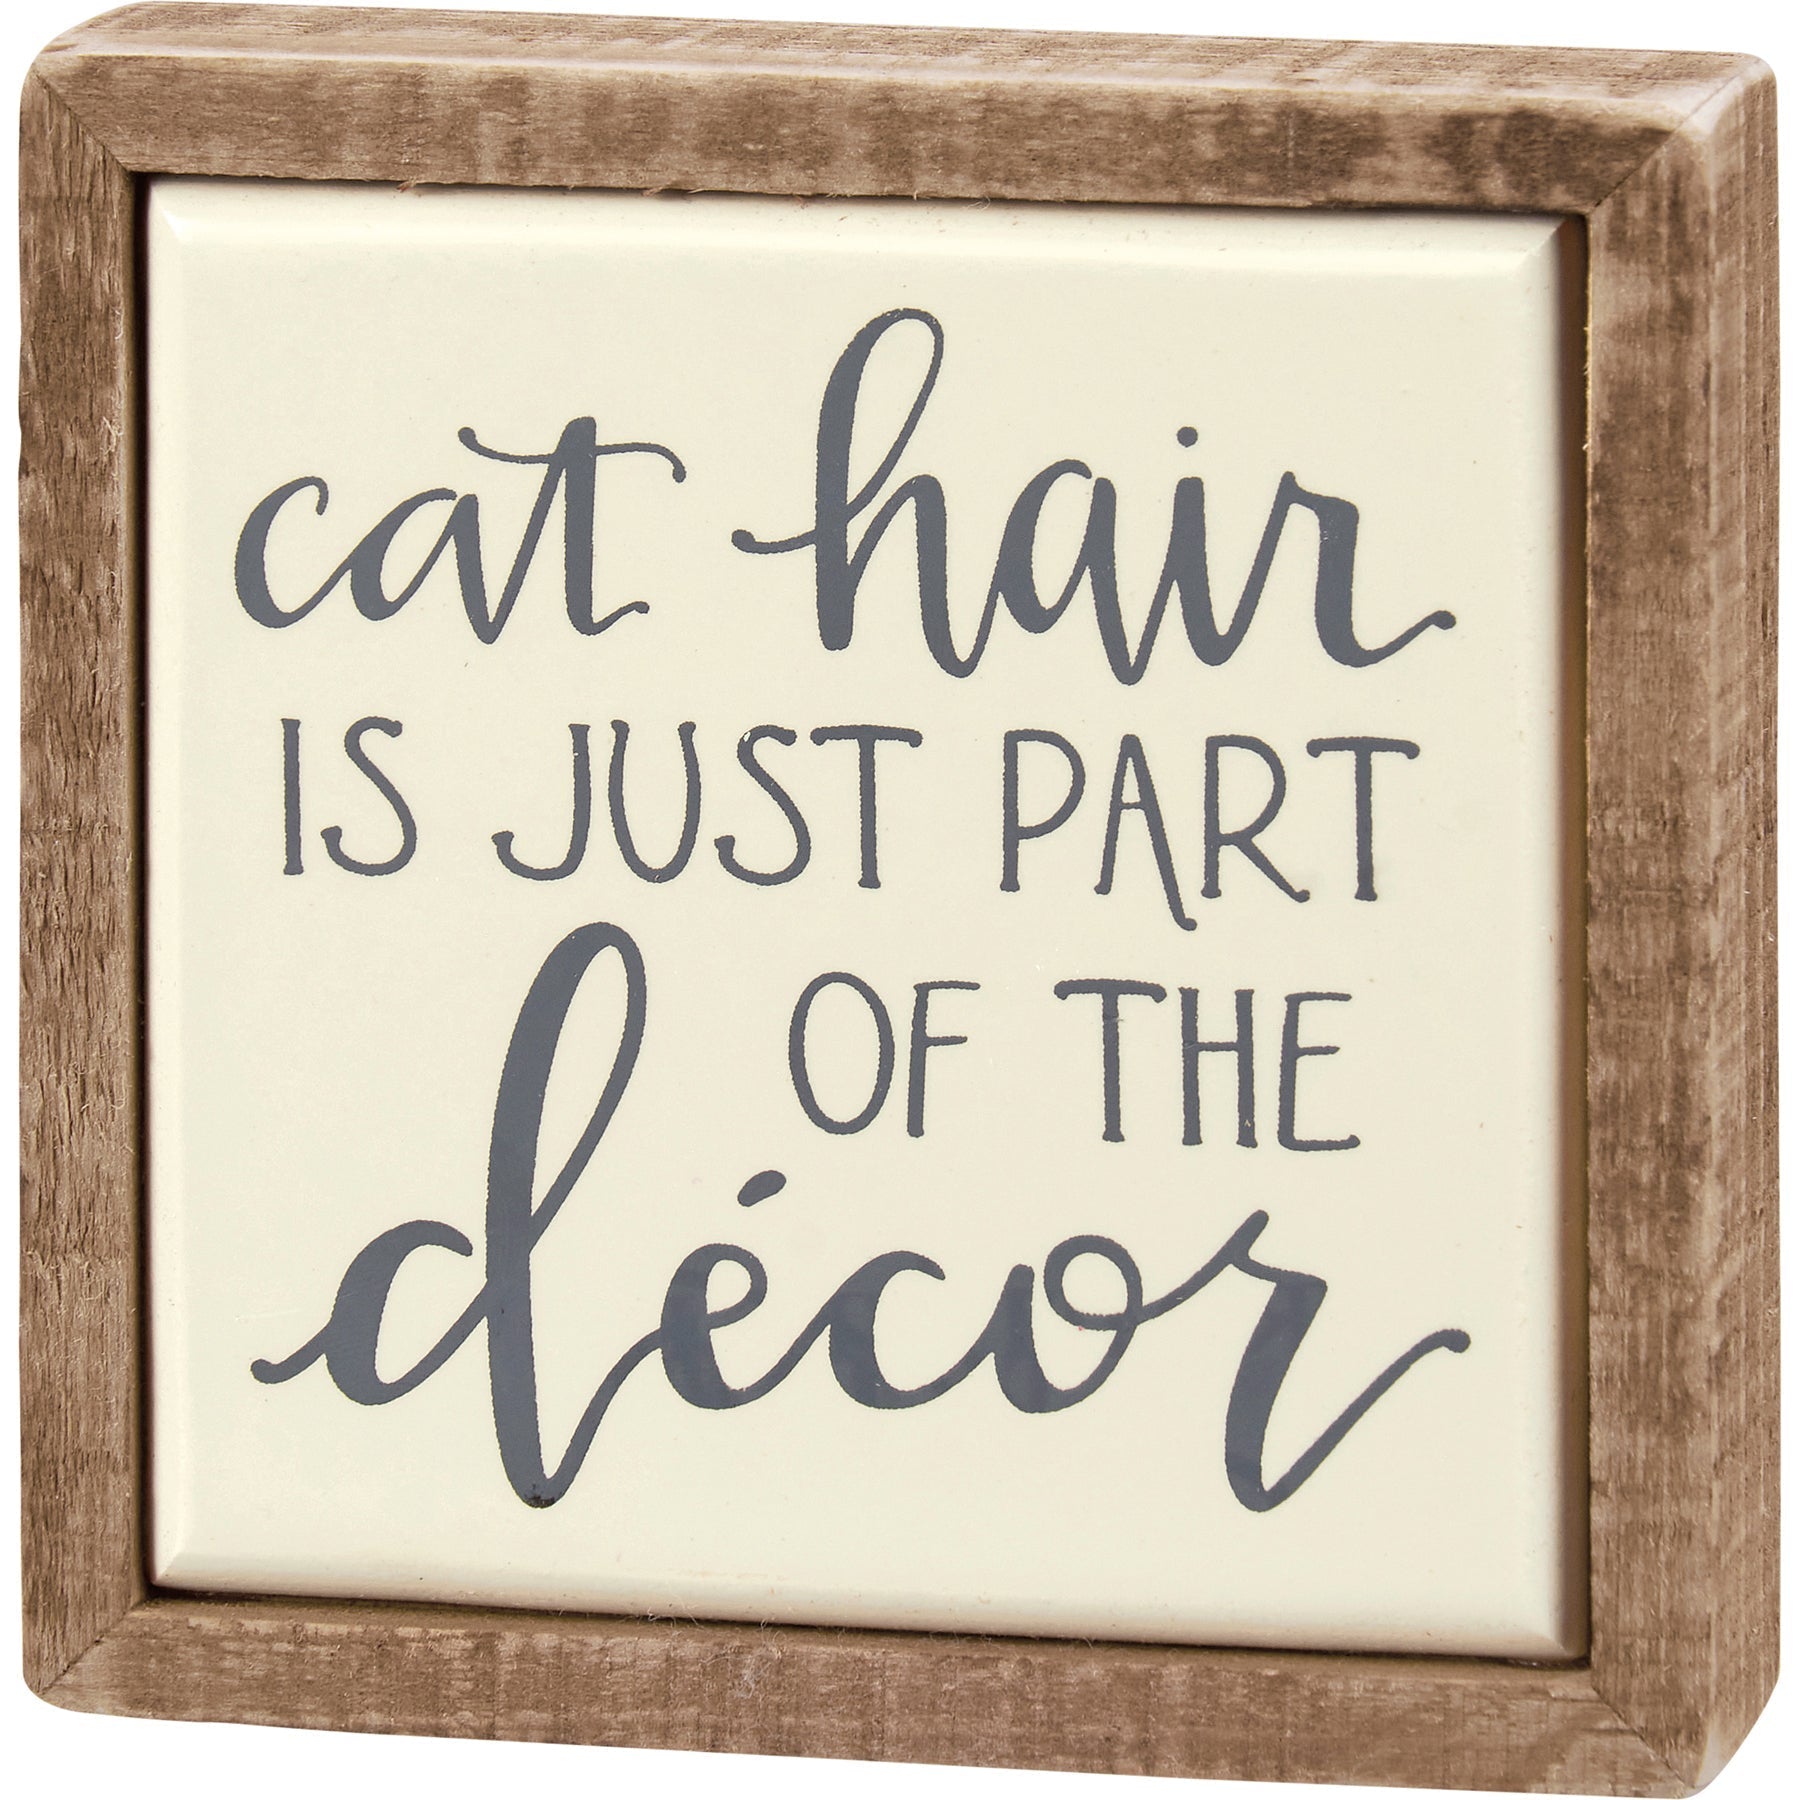 Funny Cat Themed Wall Art, Cat Hair Is Part Of The Decor Box Sign